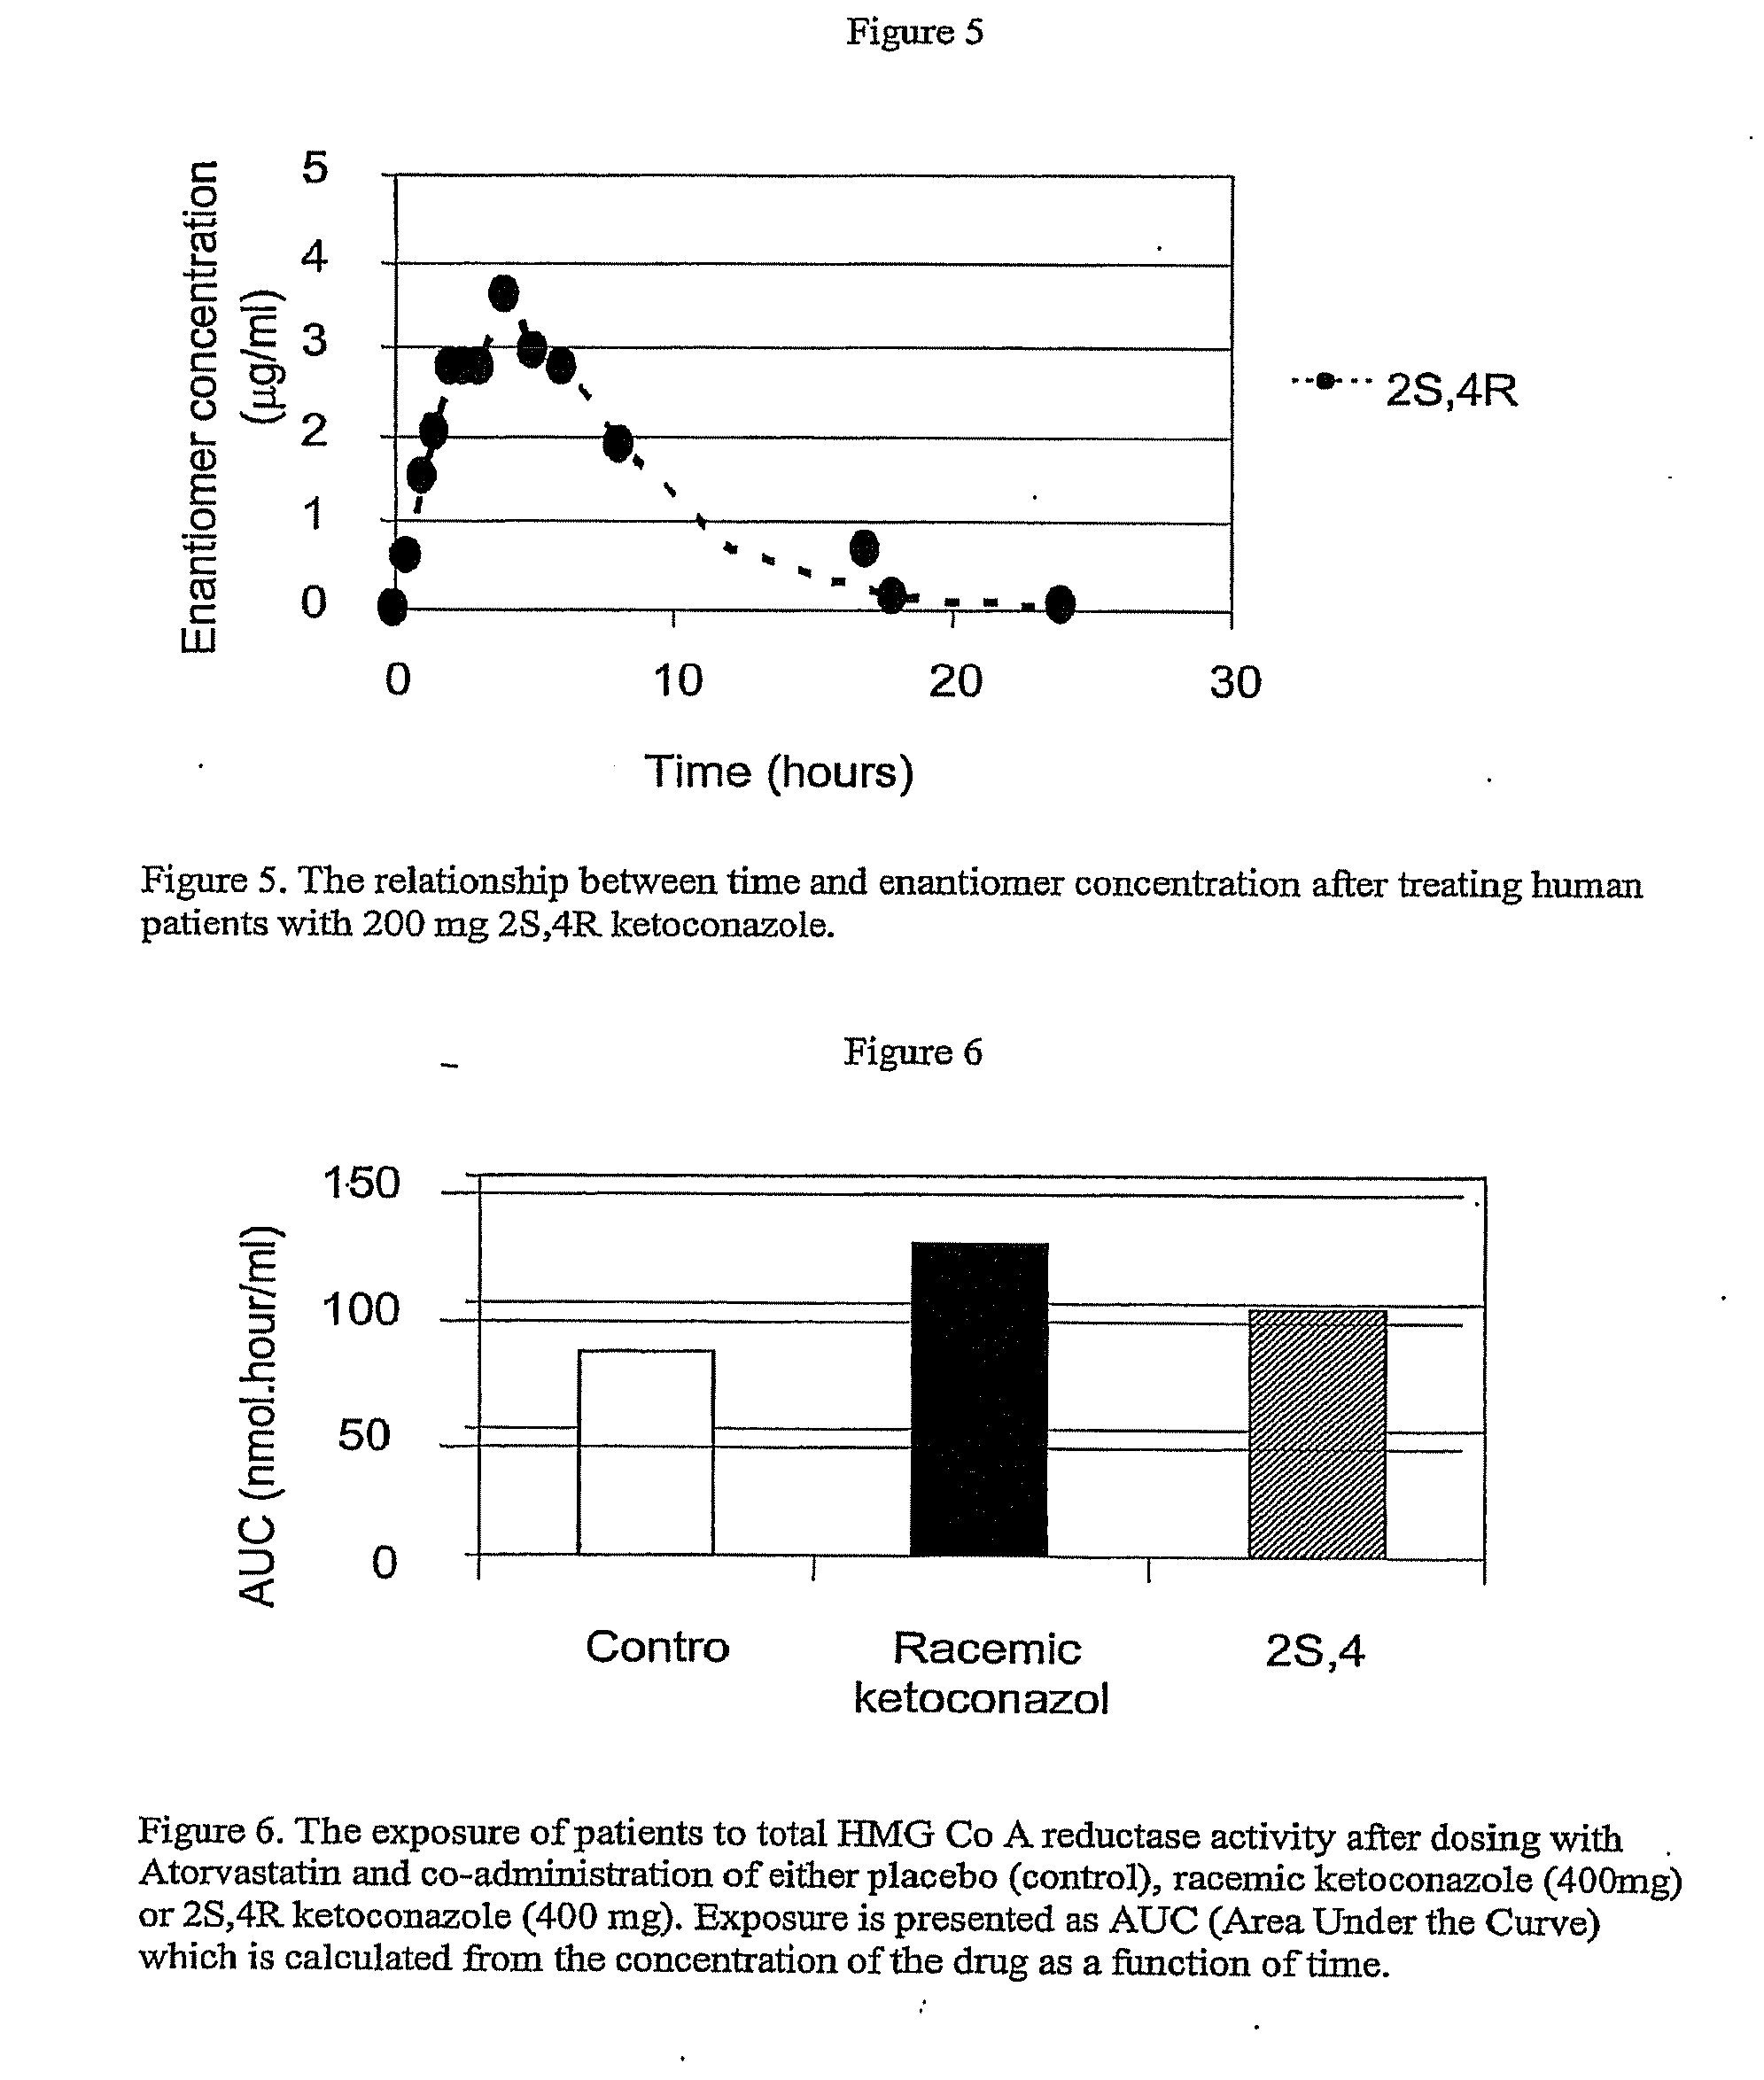 Methods and Compositions for Treating Prostate Cancer, Benign Prostatic Hypertrophy, Polycystic Ovary Syndrome and Other Conditions